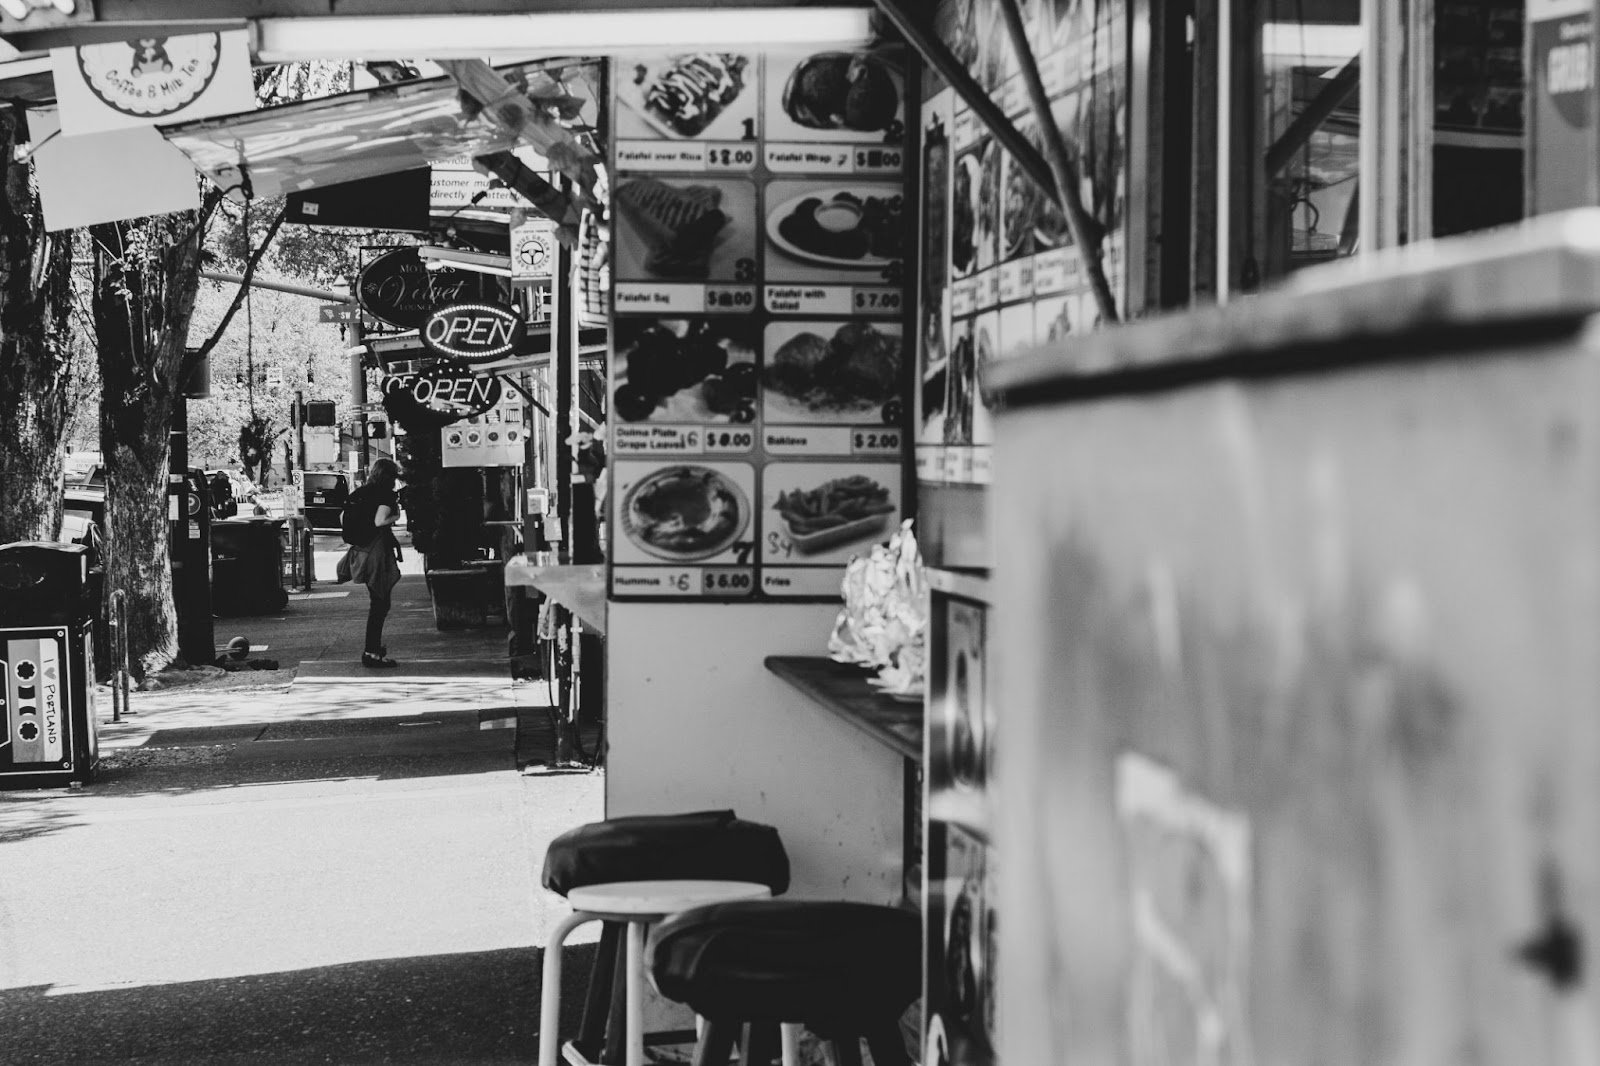 The food in Oregon is tasty so travelers should try some of the local flavors. 
pictured: food trucks in Oregon